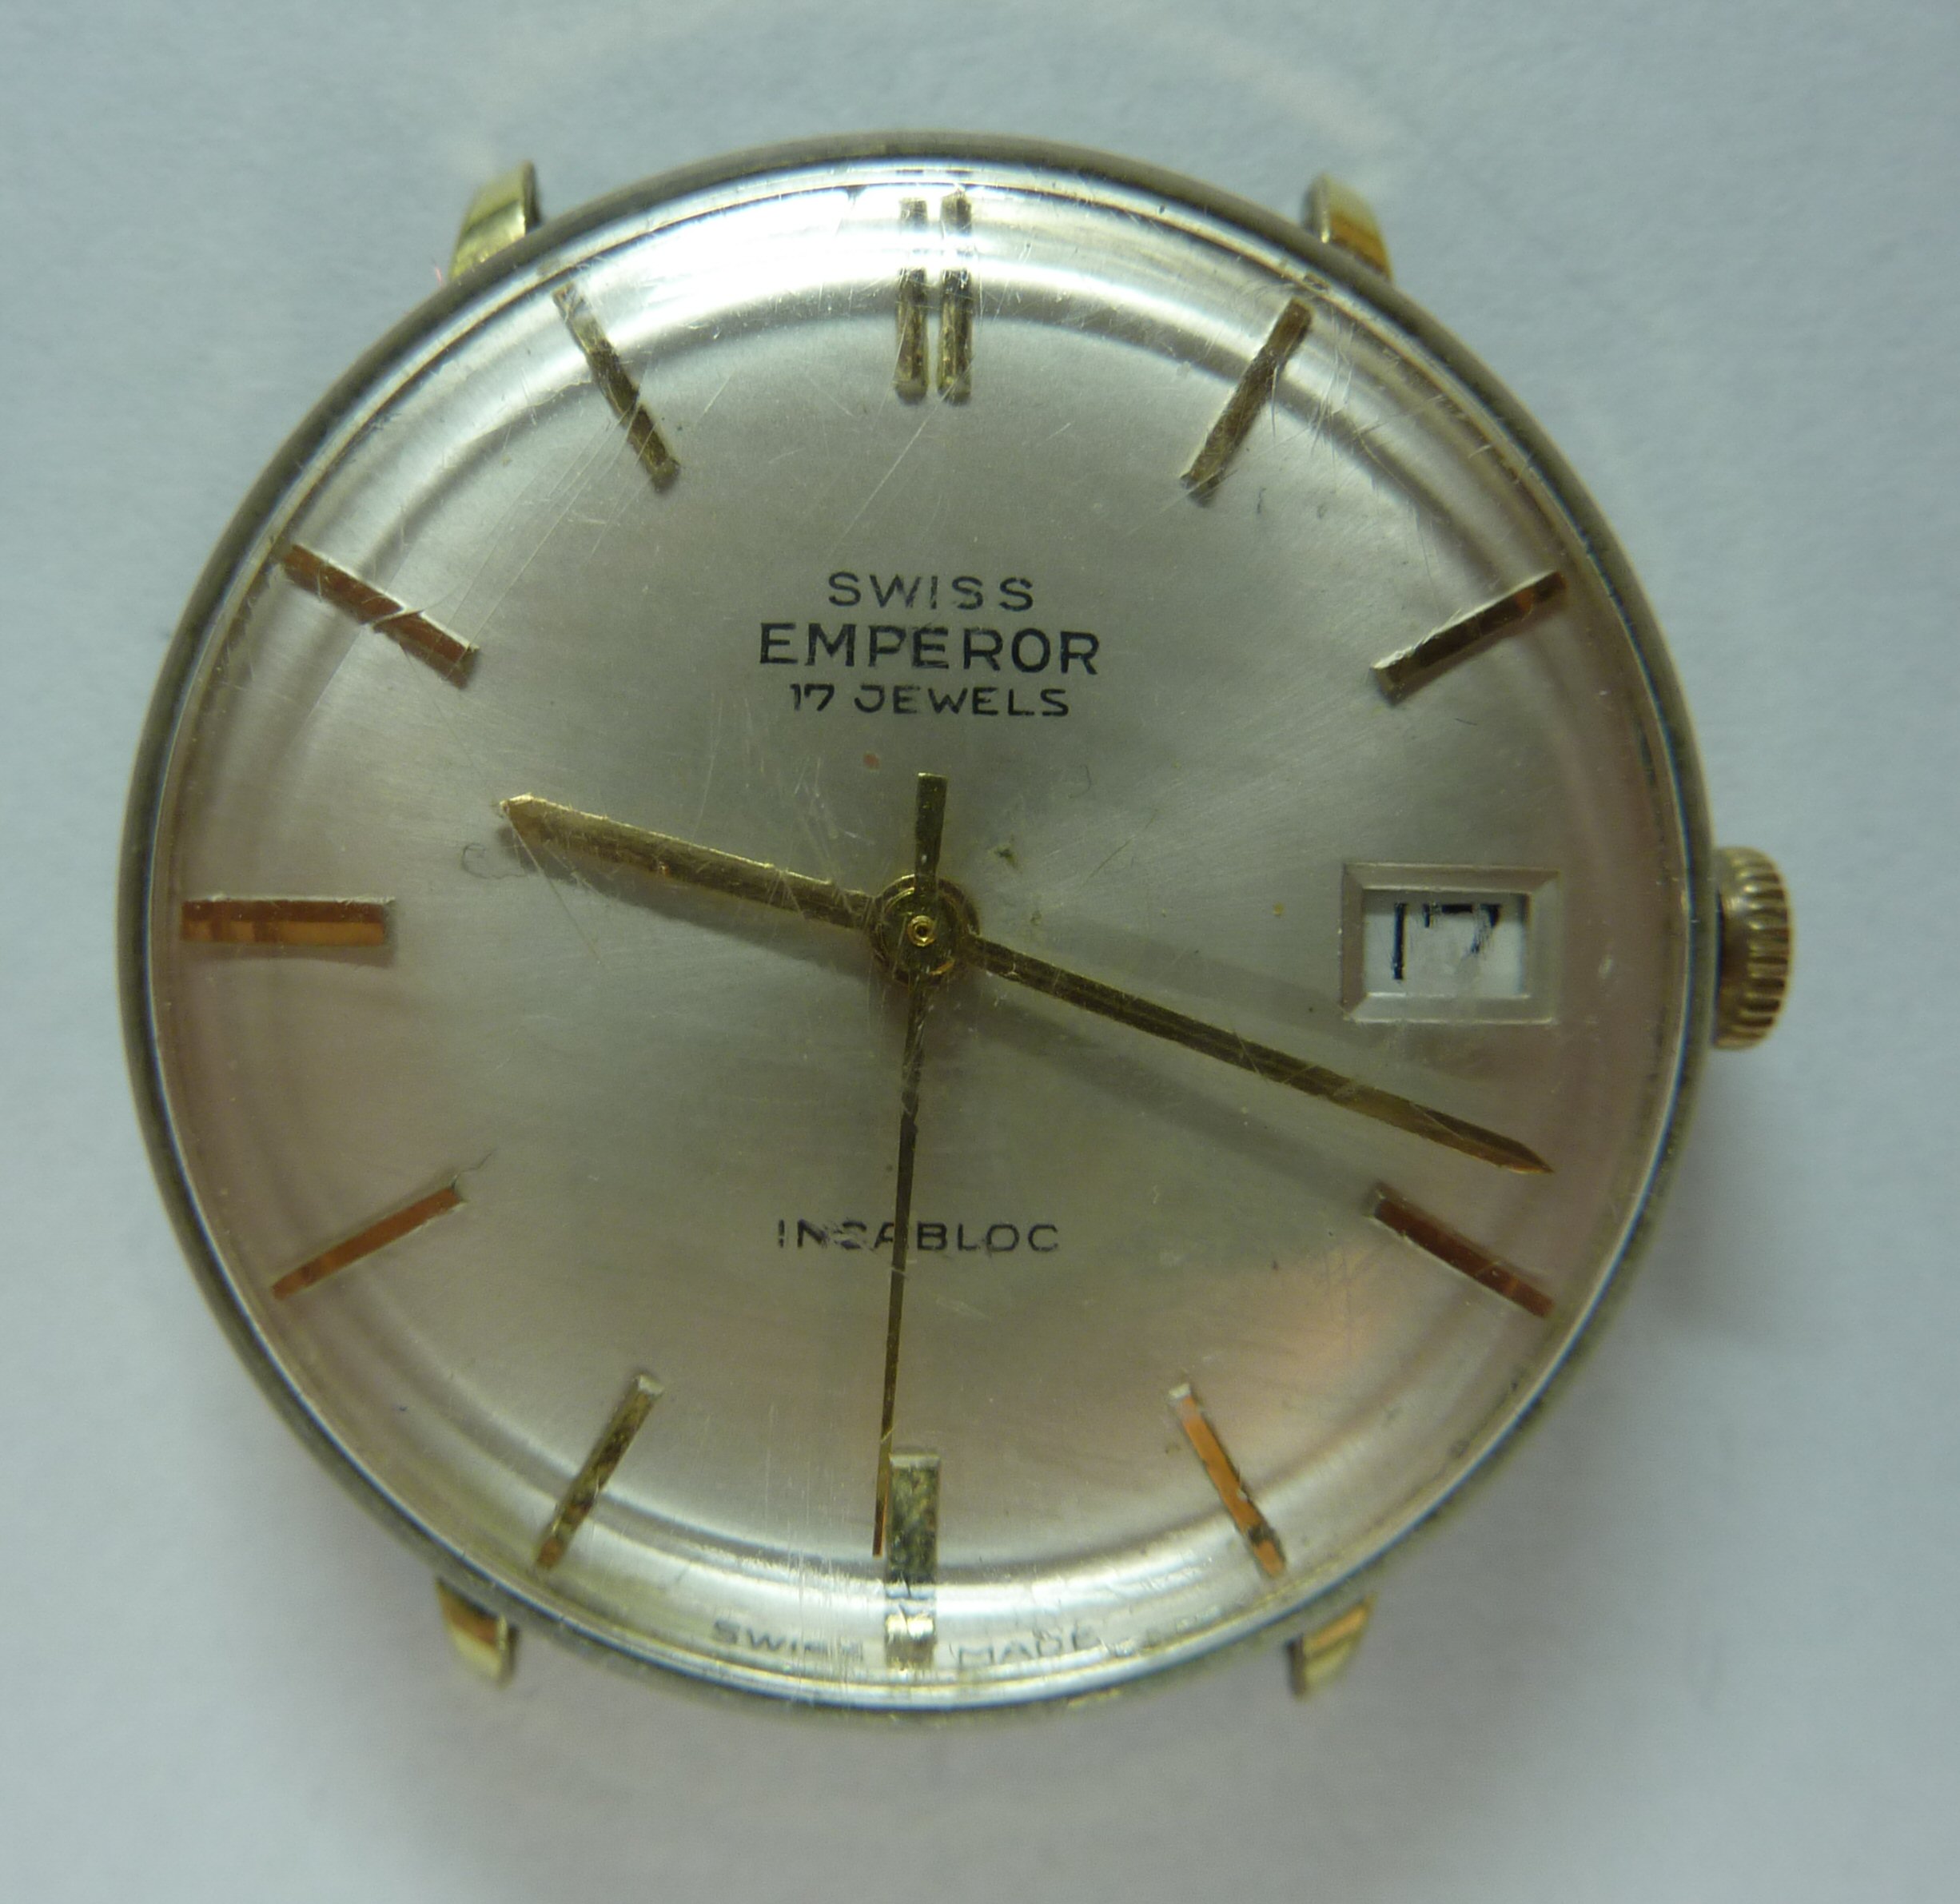 Swiss Emperor Watch - Any Good? - Page 4 - Chat About Watches & The  Industry Here - Watch Repair Talk